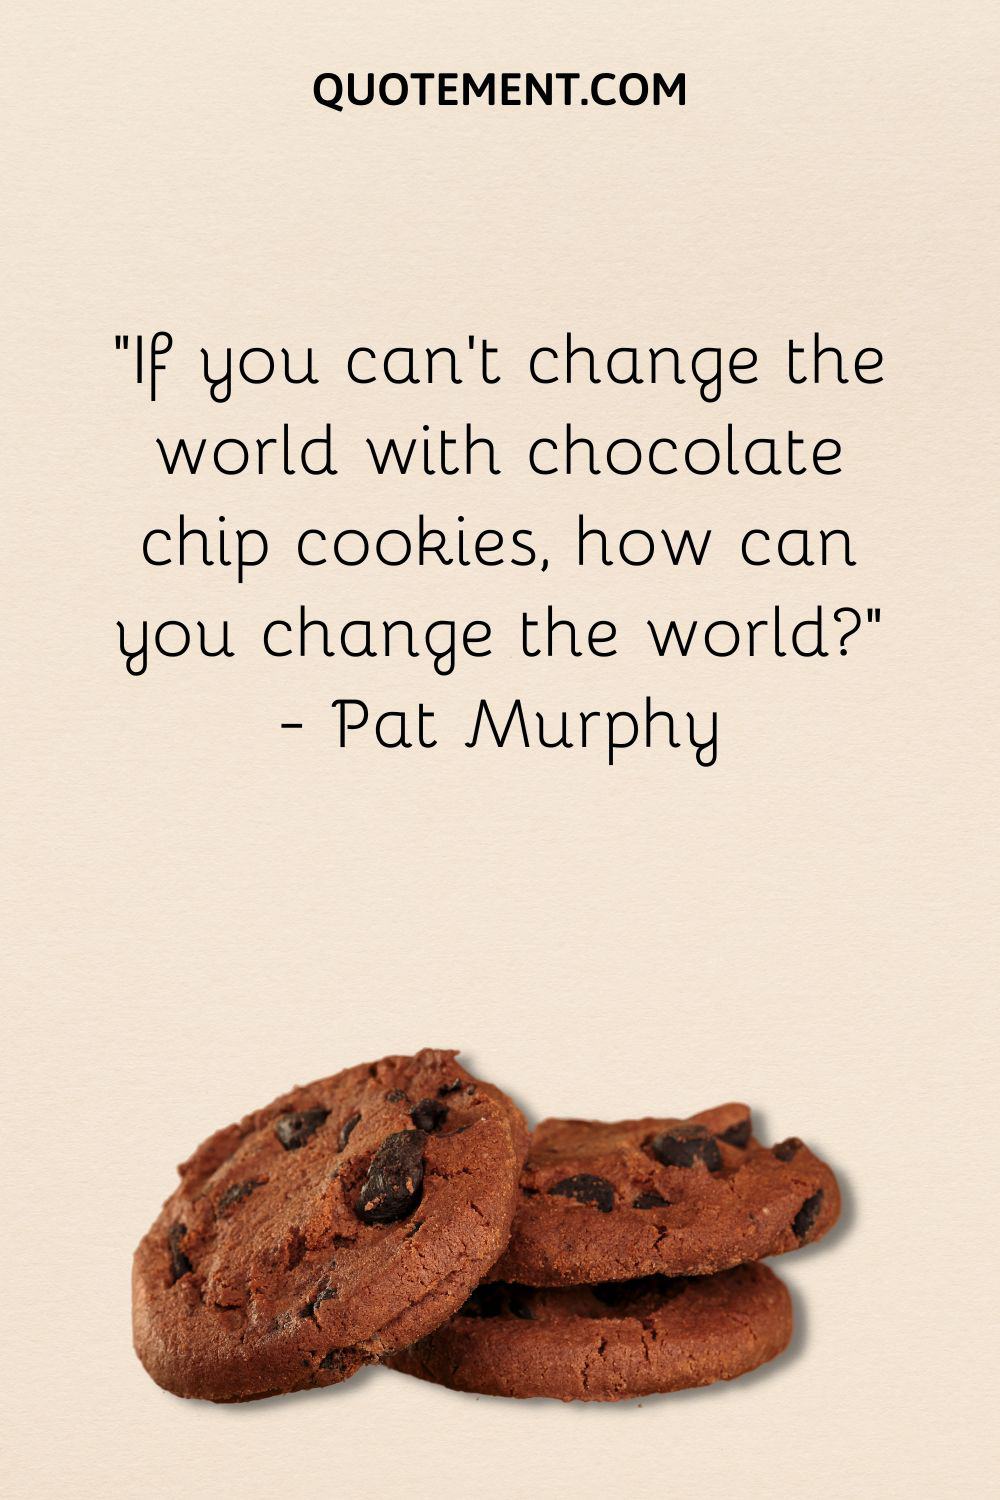 If you can't change the world with chocolate chip cookies